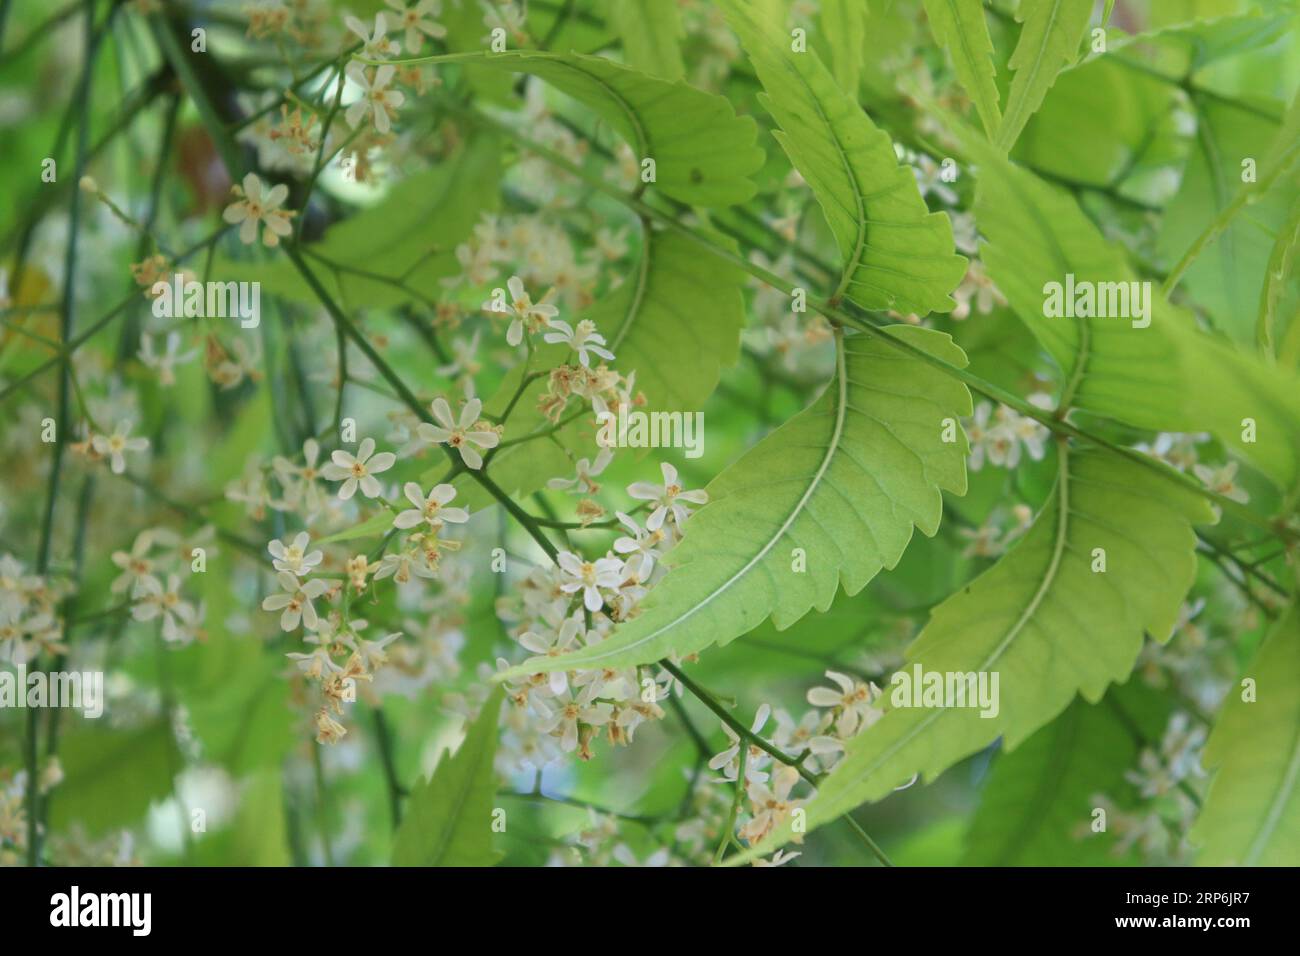 flowers and leaves of Neem tree (Azadirachta indica) Stock Photo